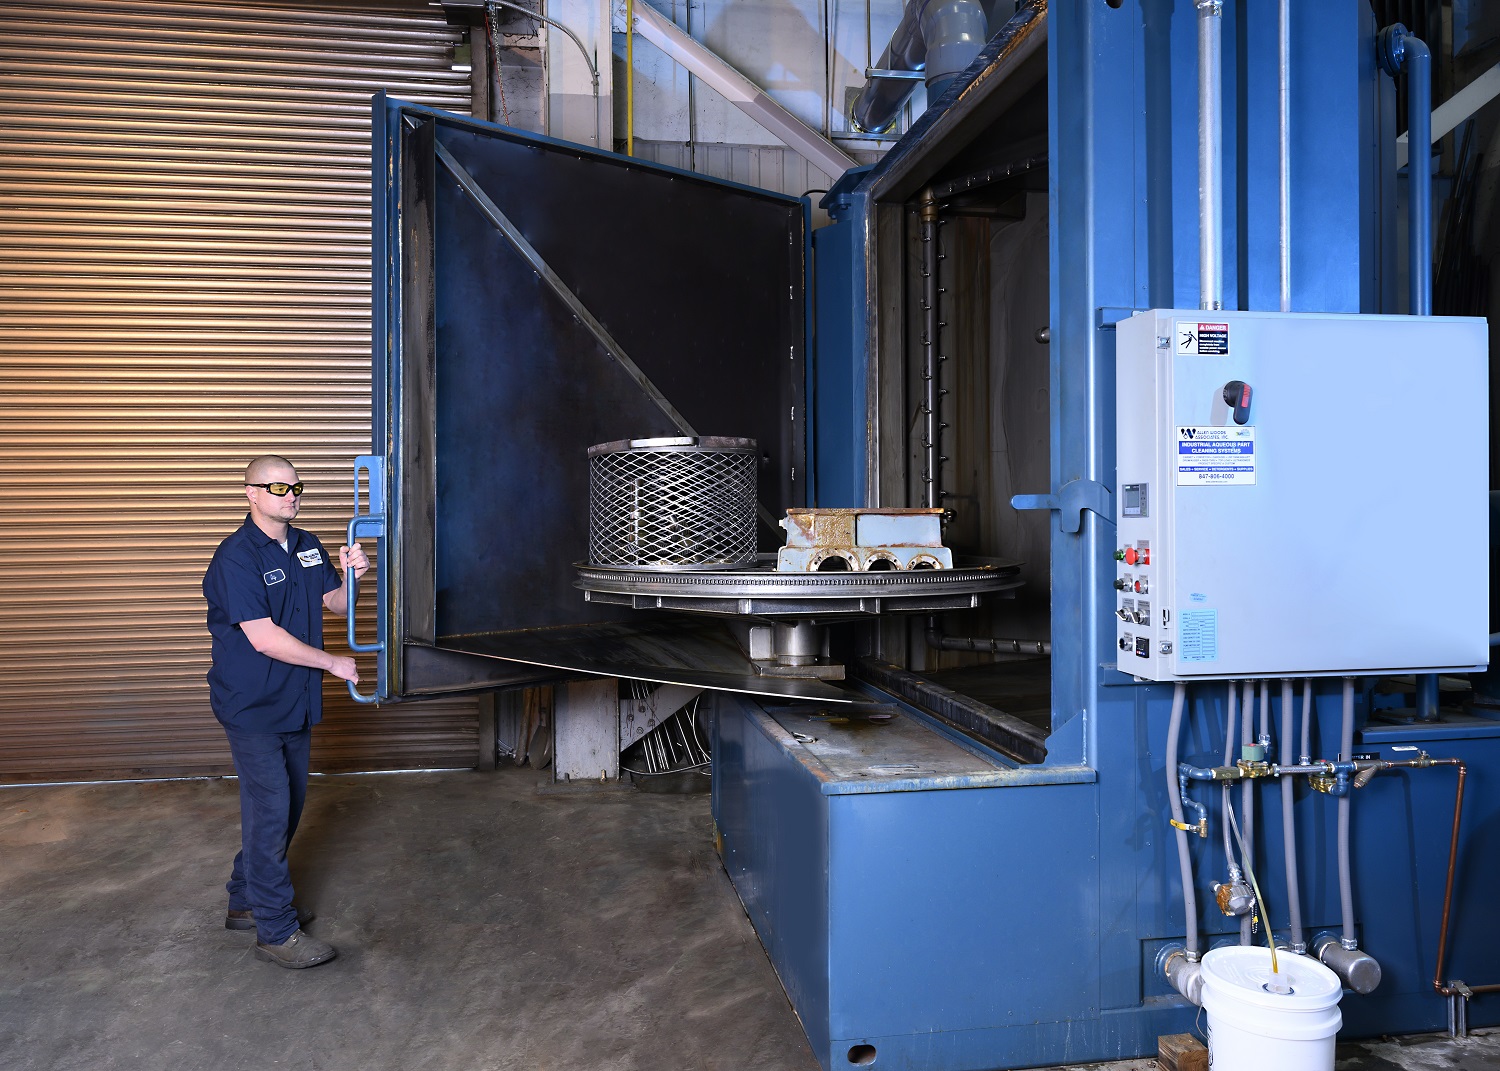 One of Timken's major investments is a large industrial parts washer that can hold gearboxes and components up to 7,000 lbs.